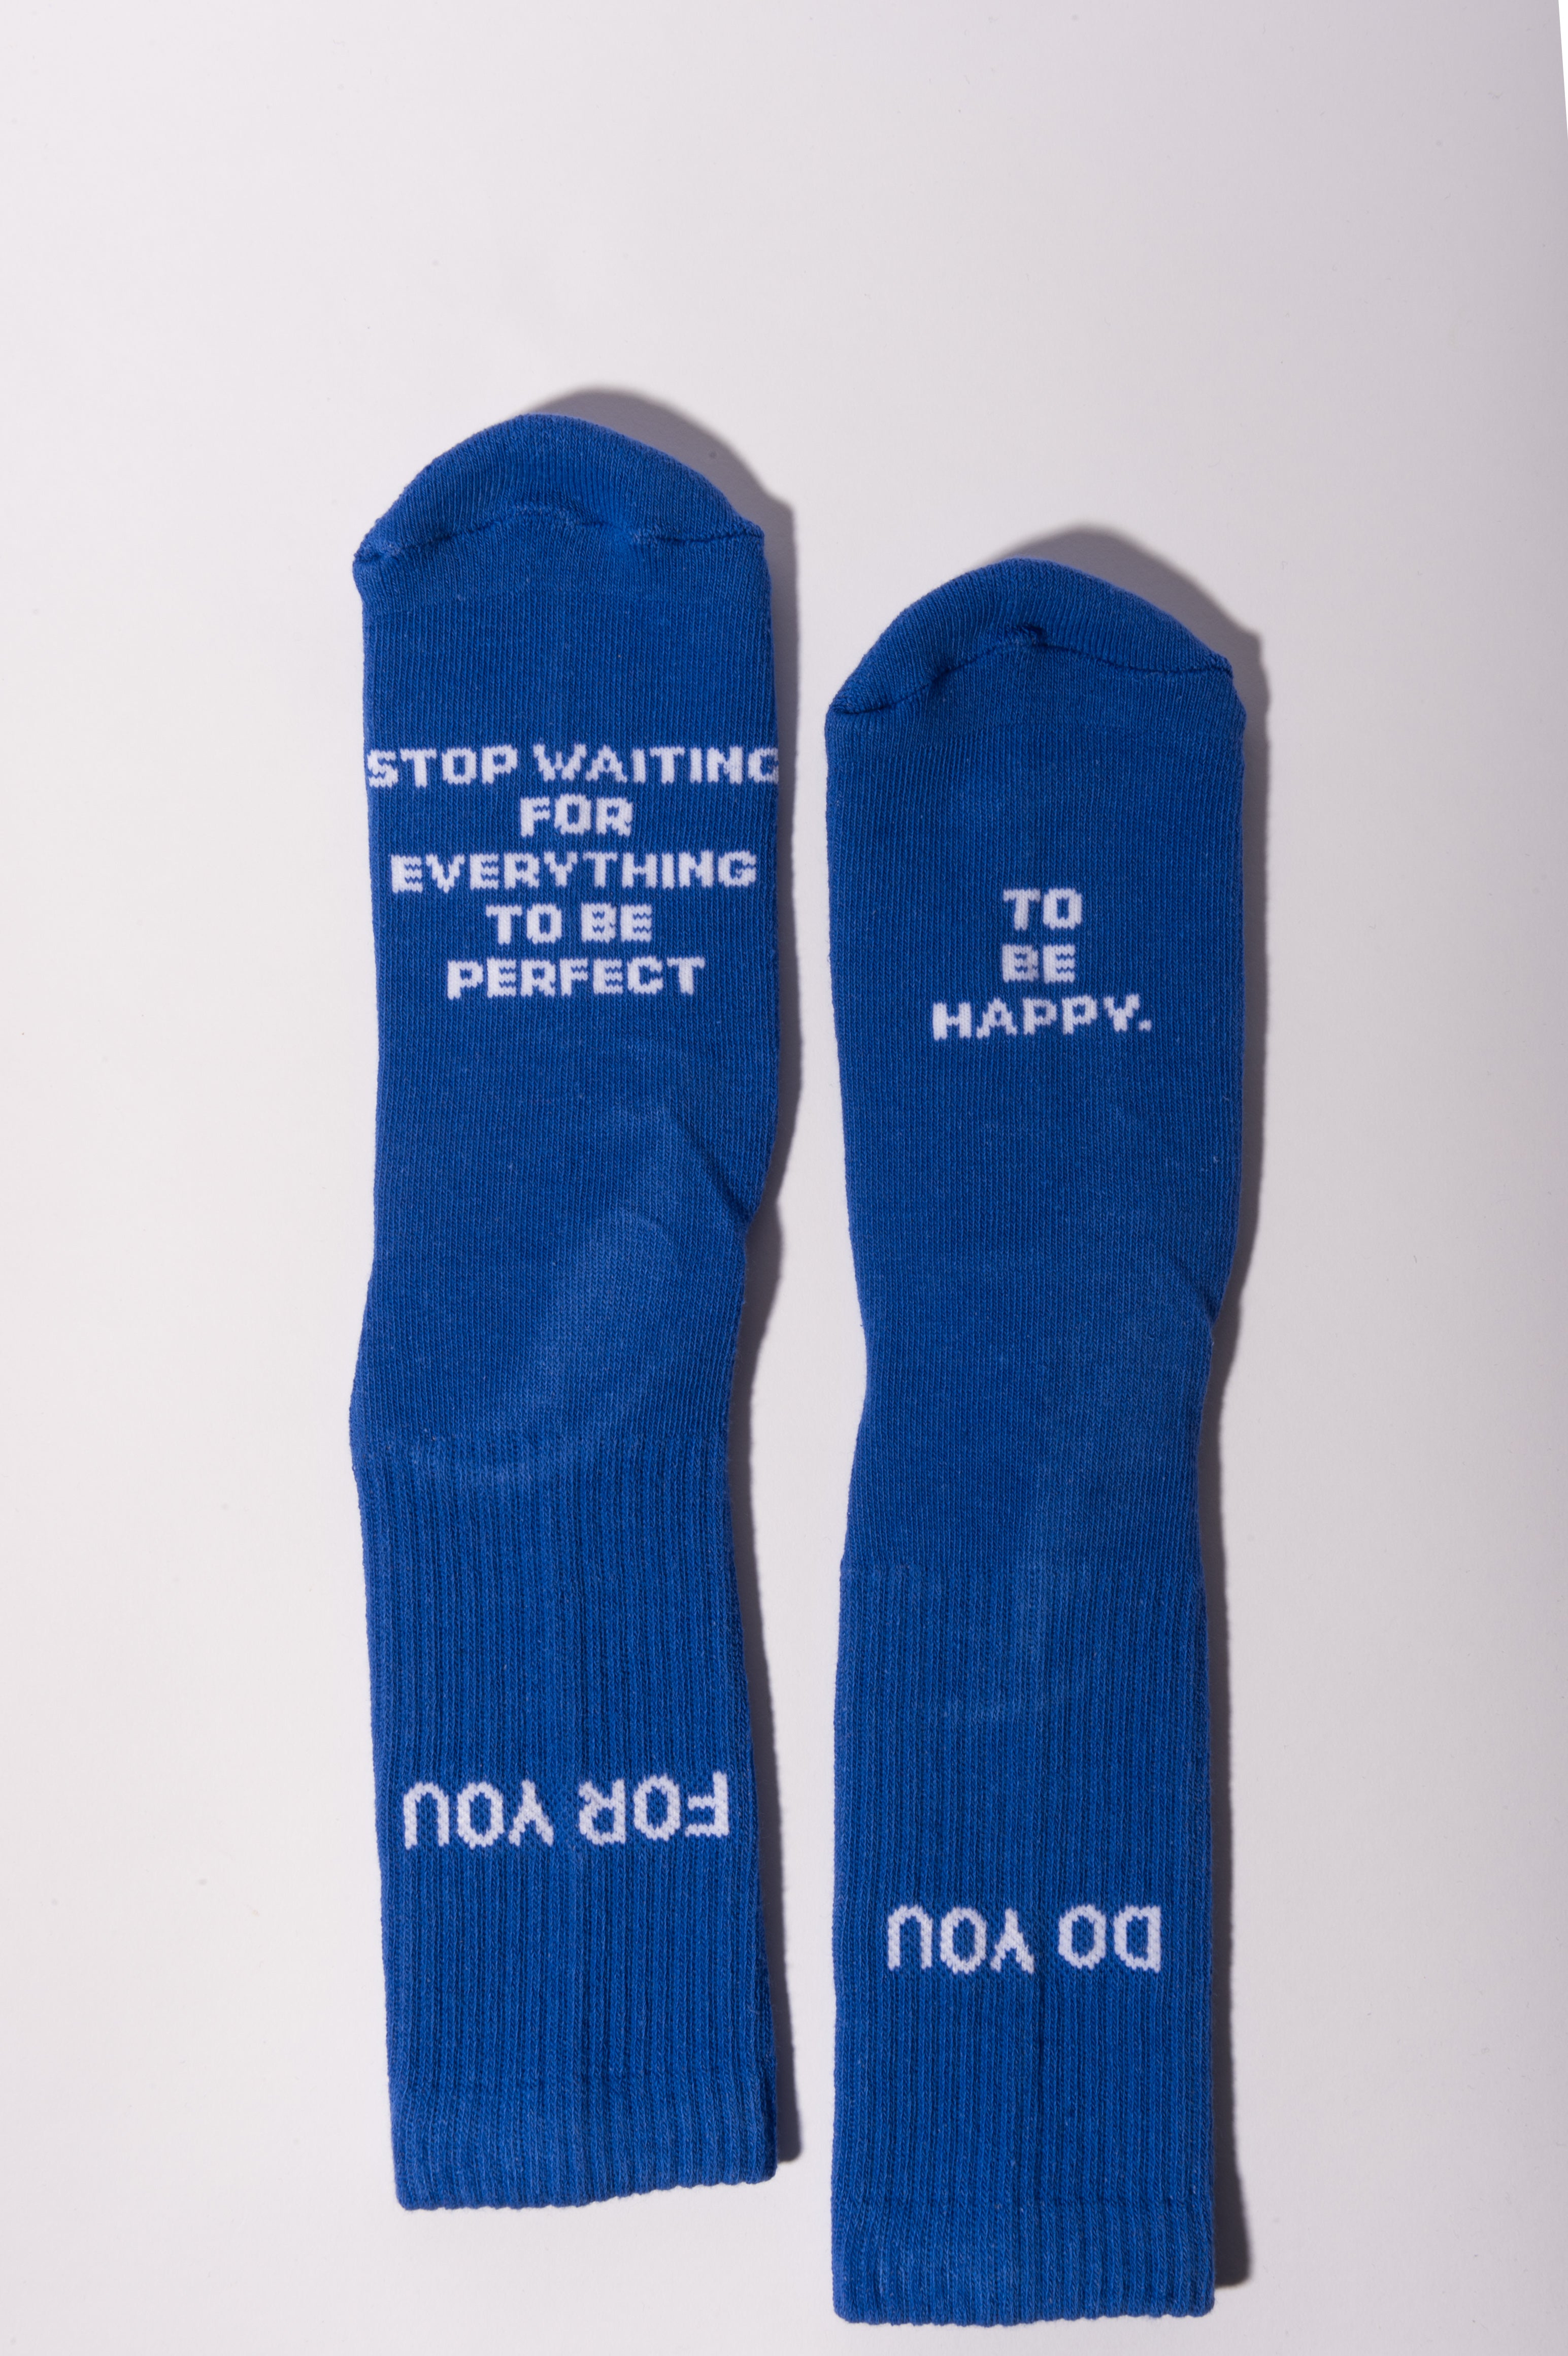 FOR YOU Women's Crew Socks - Blue with positive affirmations